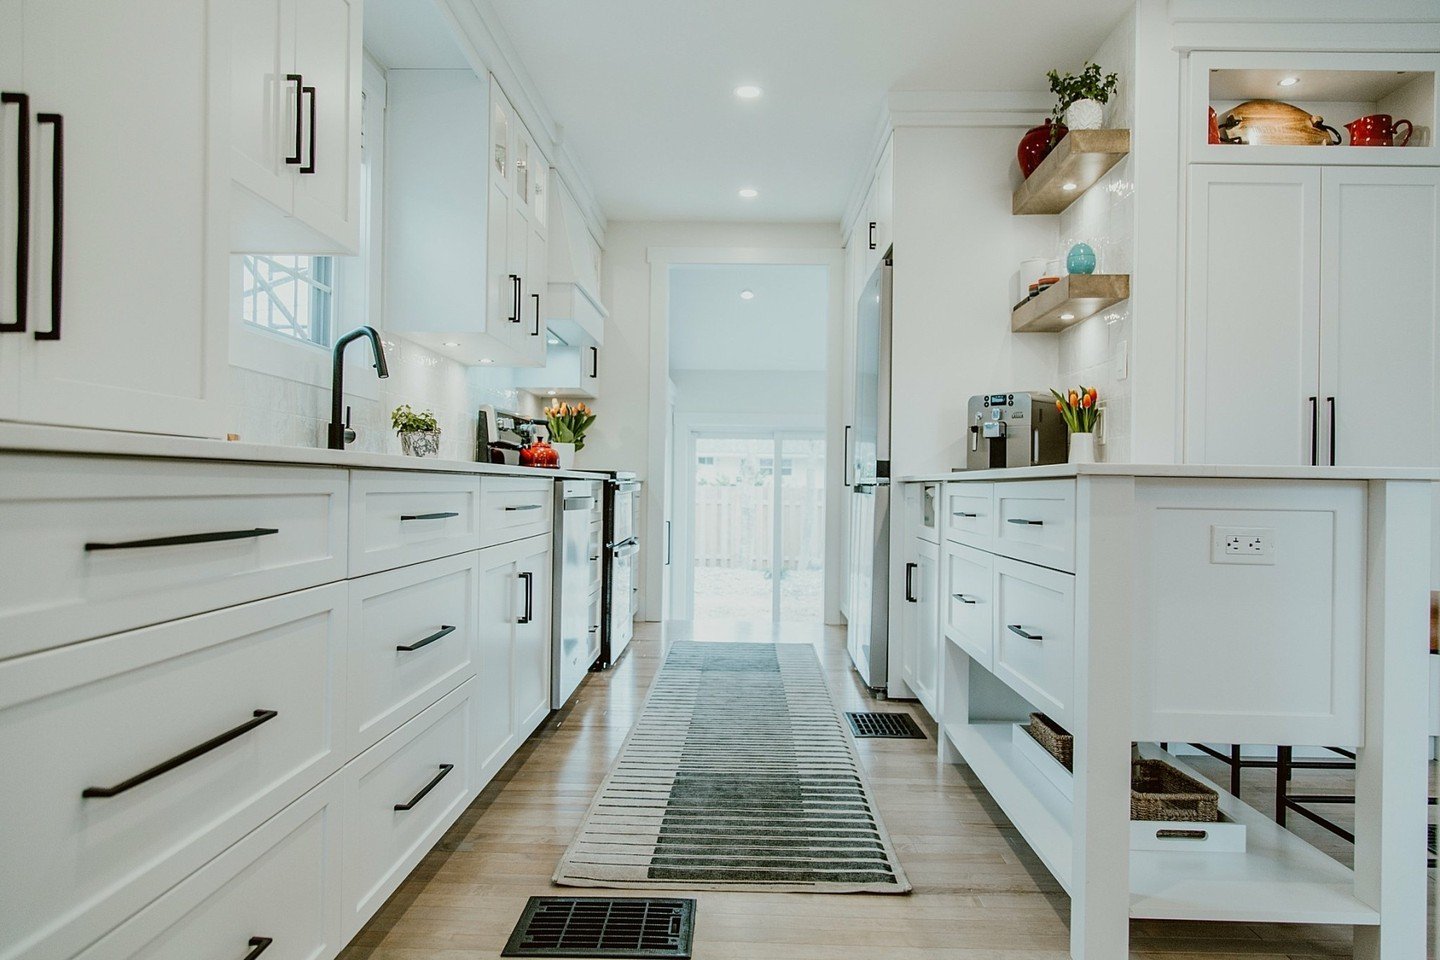 Make the best use of your space with a kitchen designed by @avondalekitchens ✨

#hometeamrenovations #homeliferenovations #renovationshome #homeofrenovations #homeagainrenovations #homerenovationspecialist #oldhomerenovations #mobilehomerenovations #